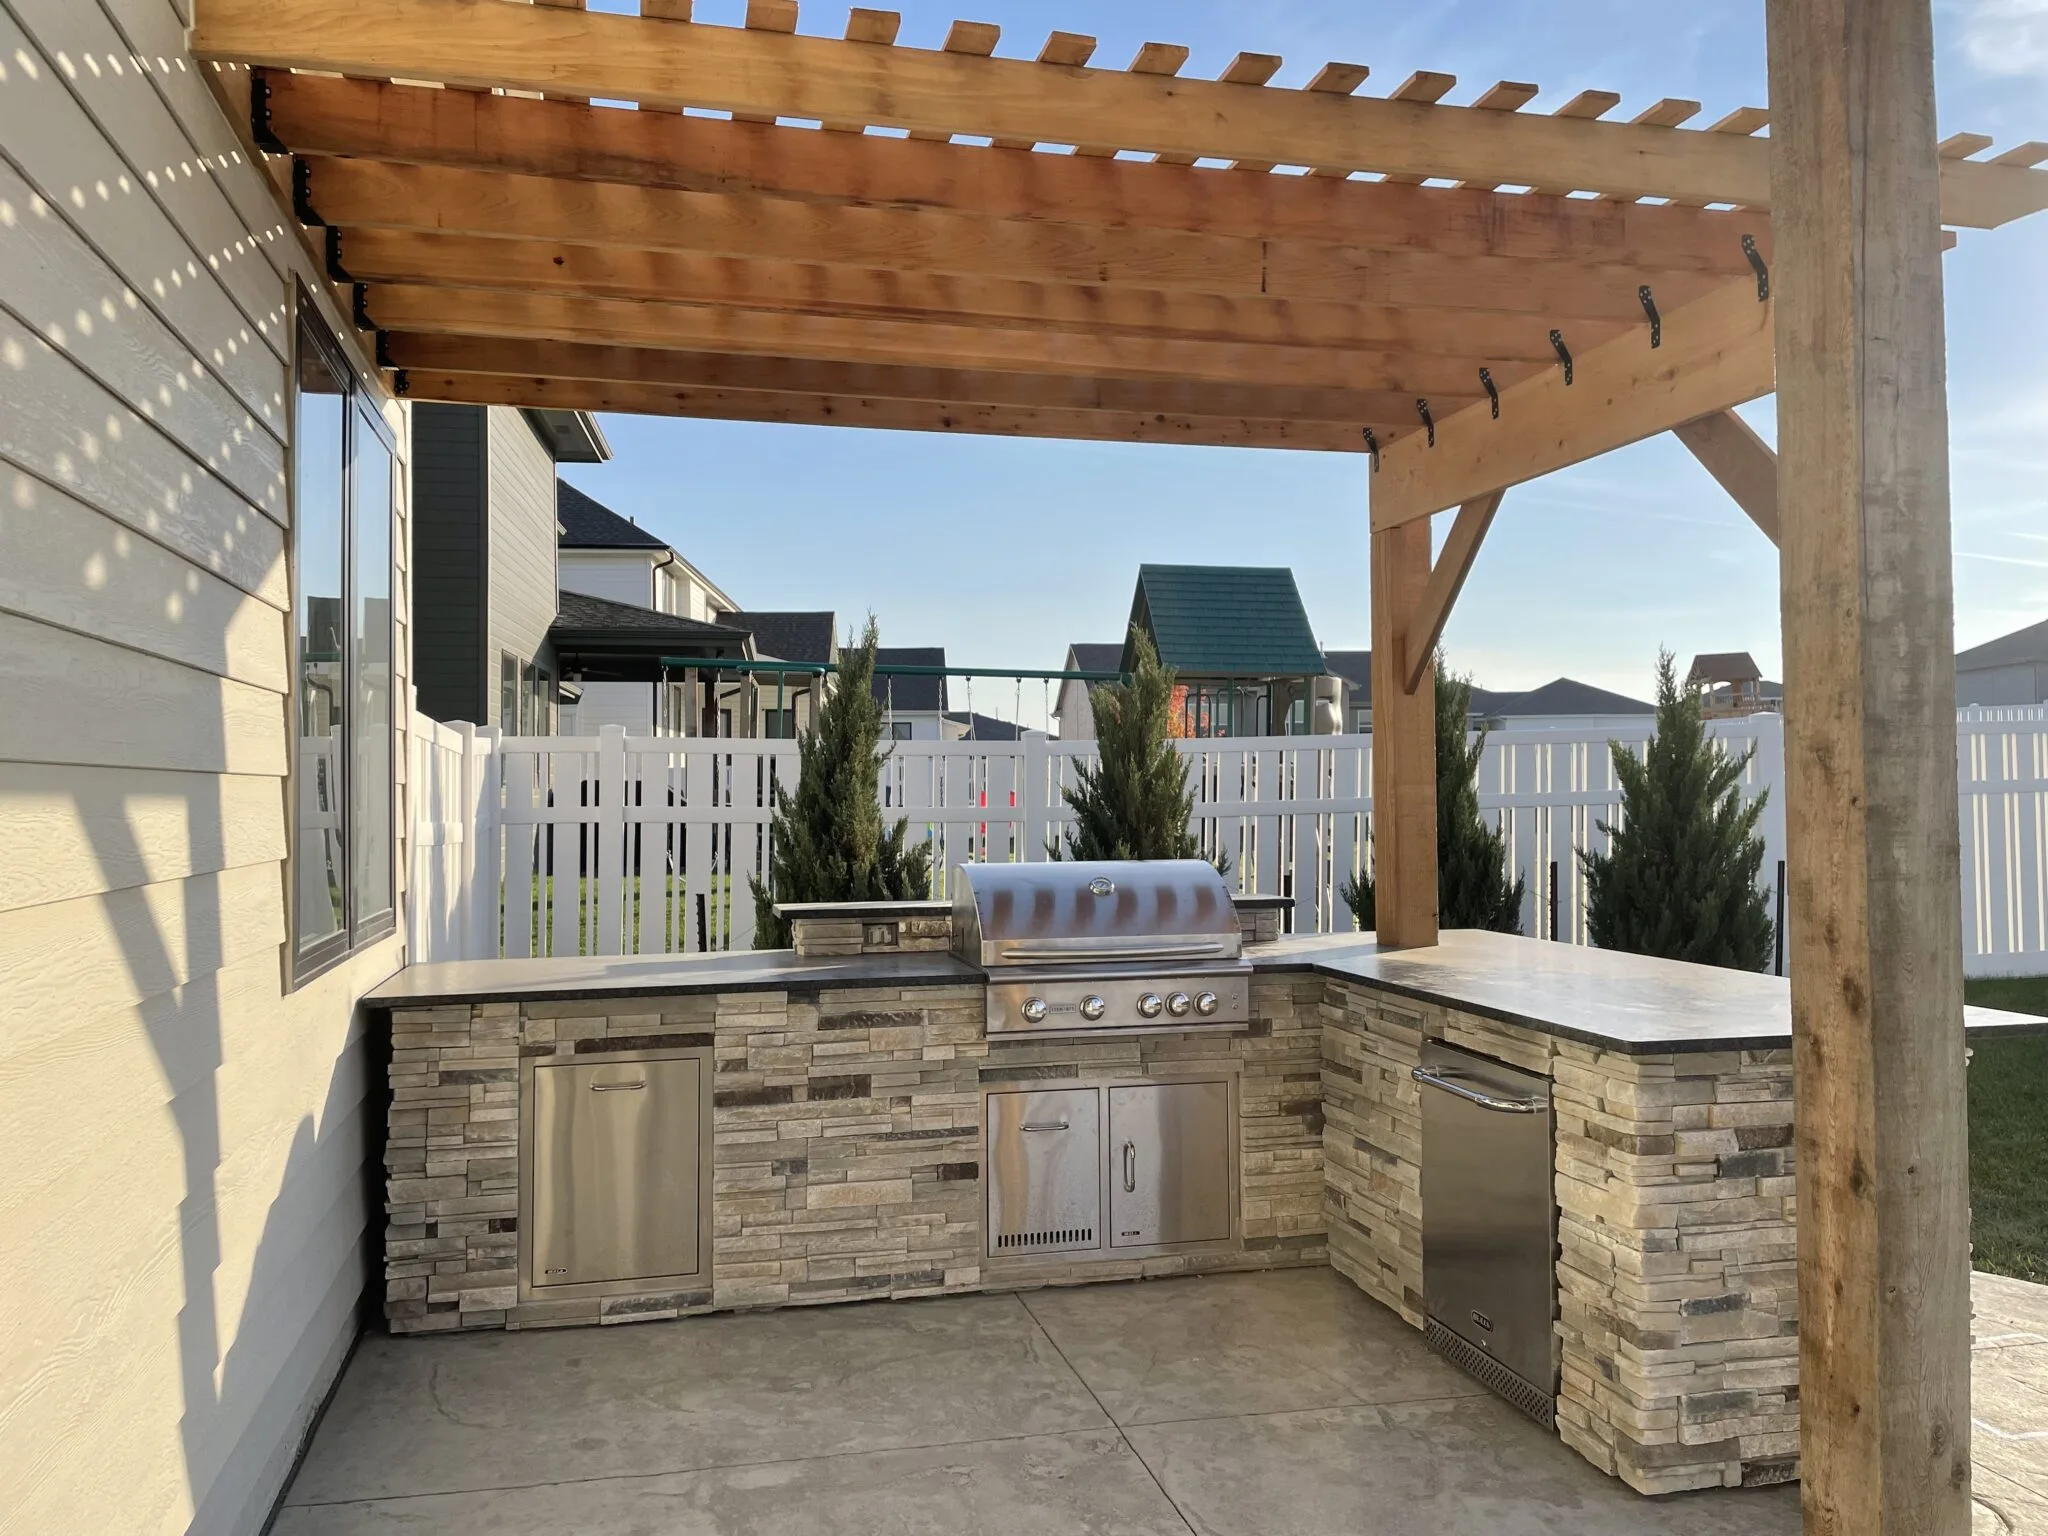 Project Spotlight: Shady and Functional Outdoor Kitchen with Pergola